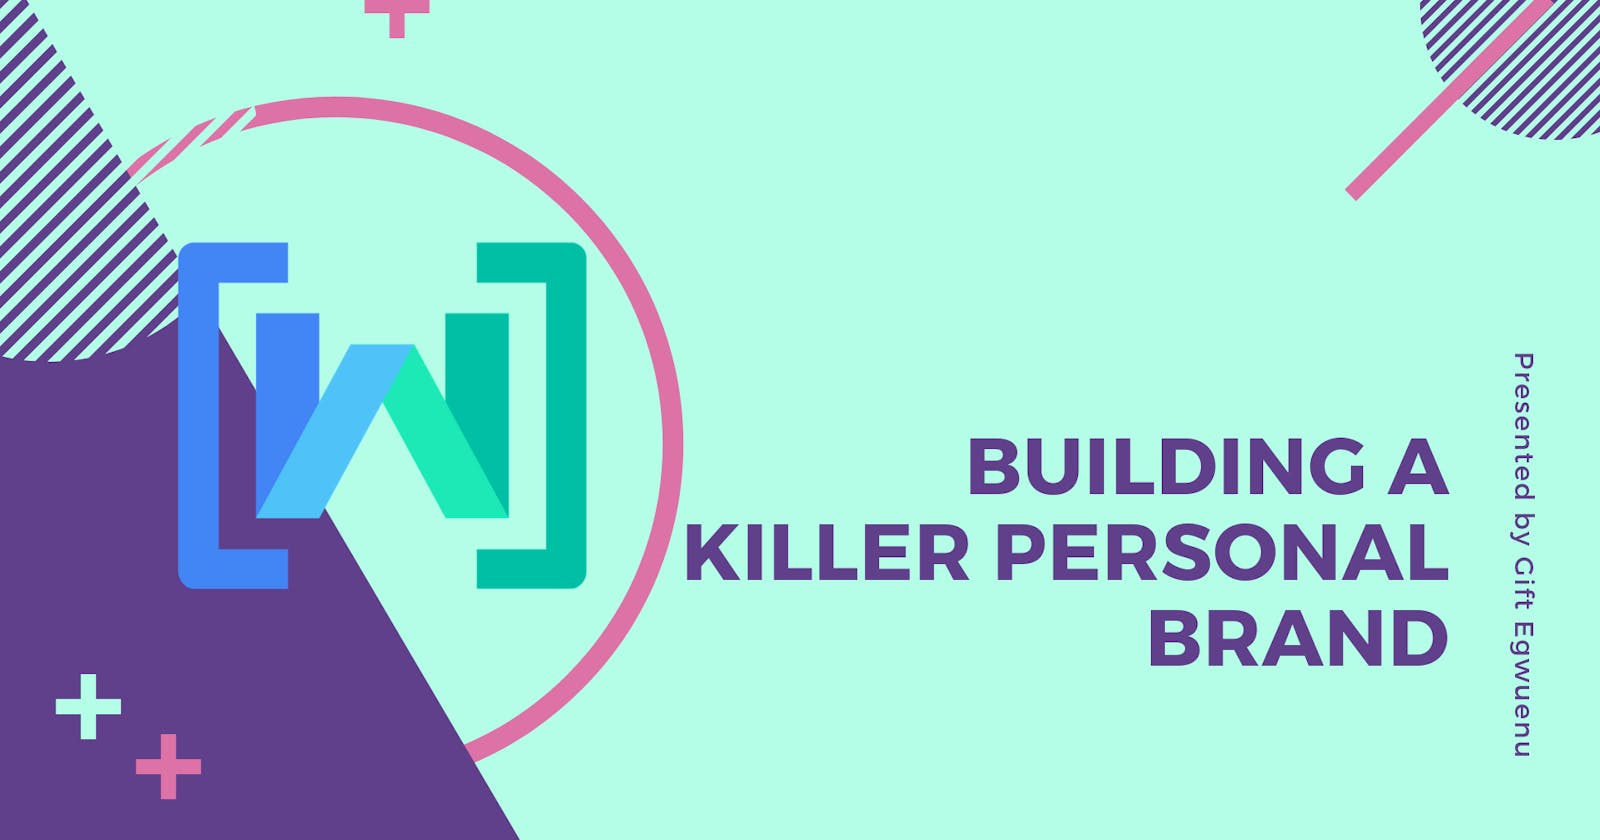 Building A Killer Personal Brand